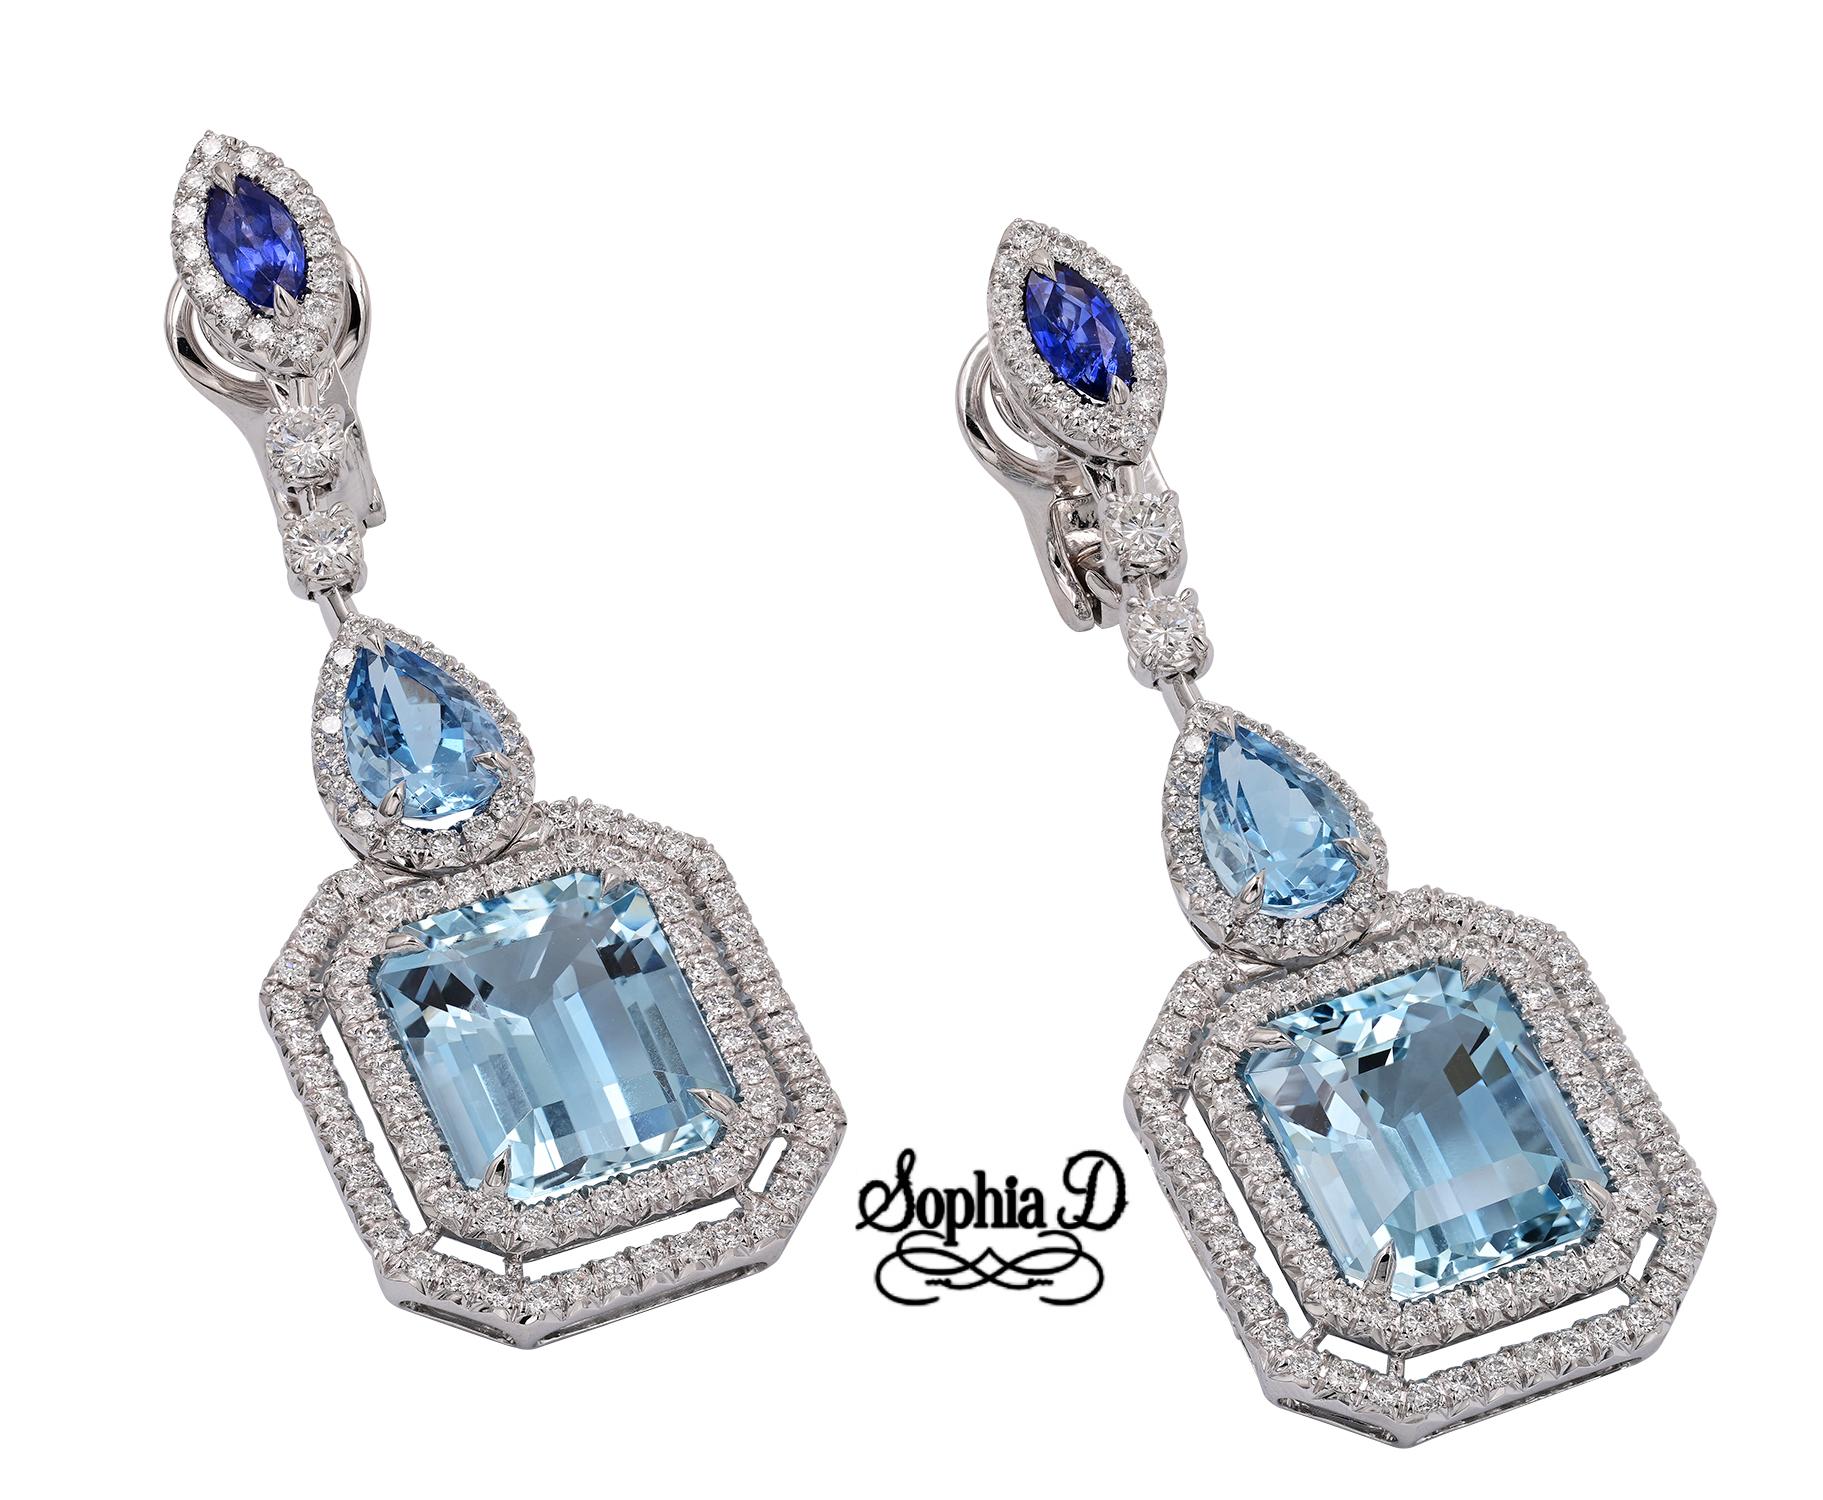 Beautifully crafted platinum earrings by Sophia D. that features a 16.27 carat aquamarine, 0.99 carat blue sapphire and 2.21 carat diamond.

Sophia D by Joseph Dardashti LTD has been known worldwide for 35 years and are inspired by classic Art Deco